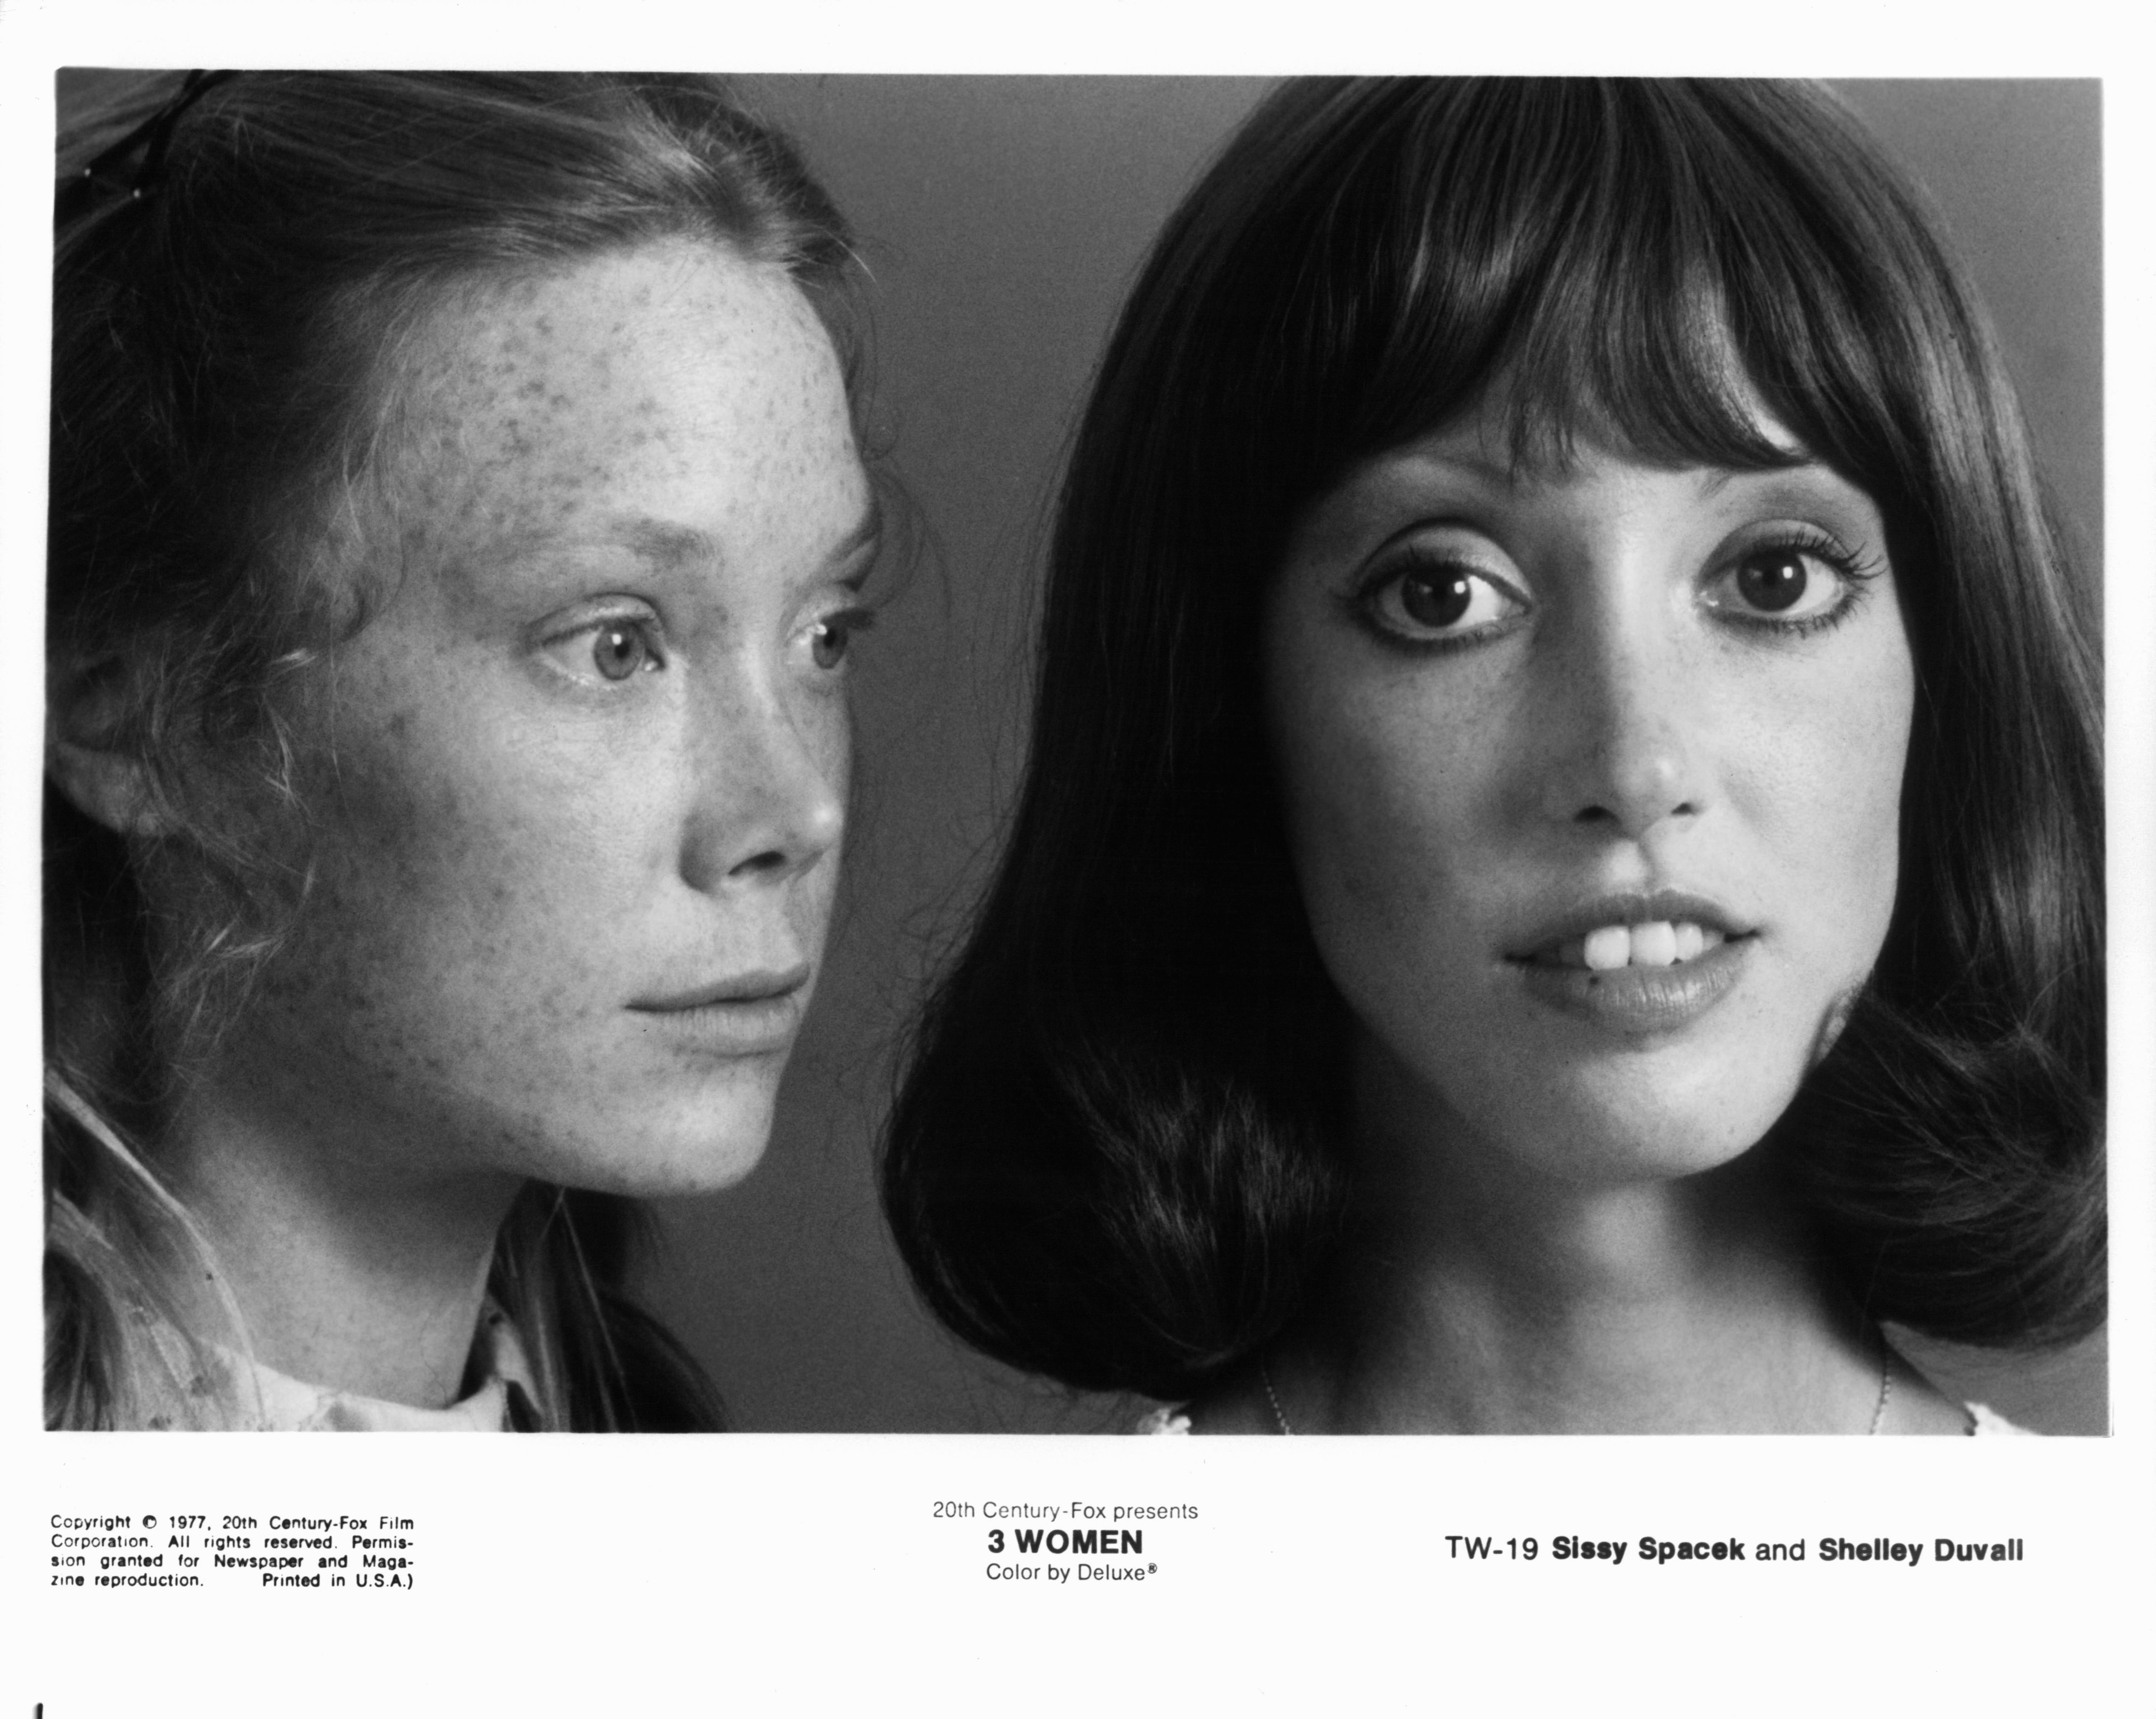 Shelley Duvall: The disappearance and return of a star pushed to her limits  by the film industry | Culture | EL PAÃS English